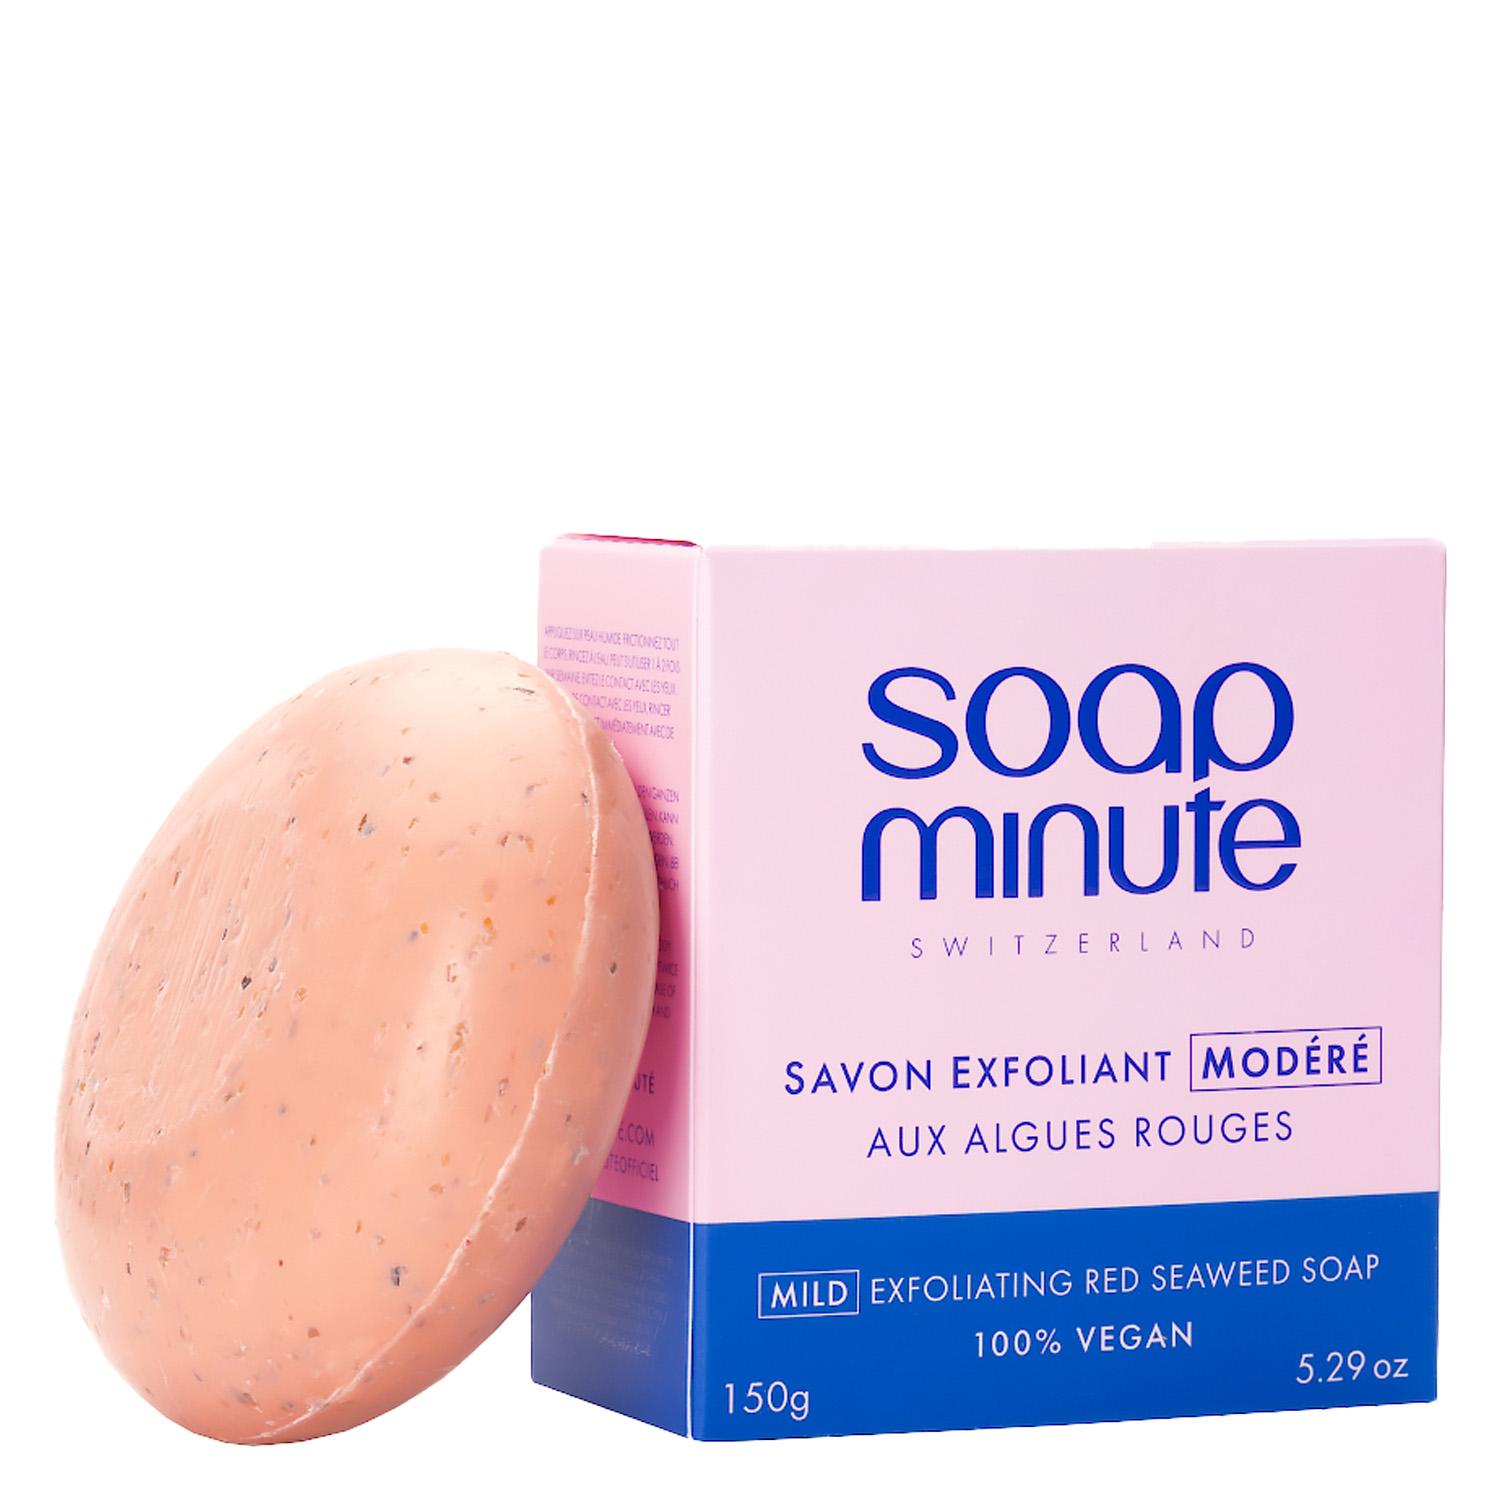 soapminute - Mild Exfoliating Red Seaweed Soap